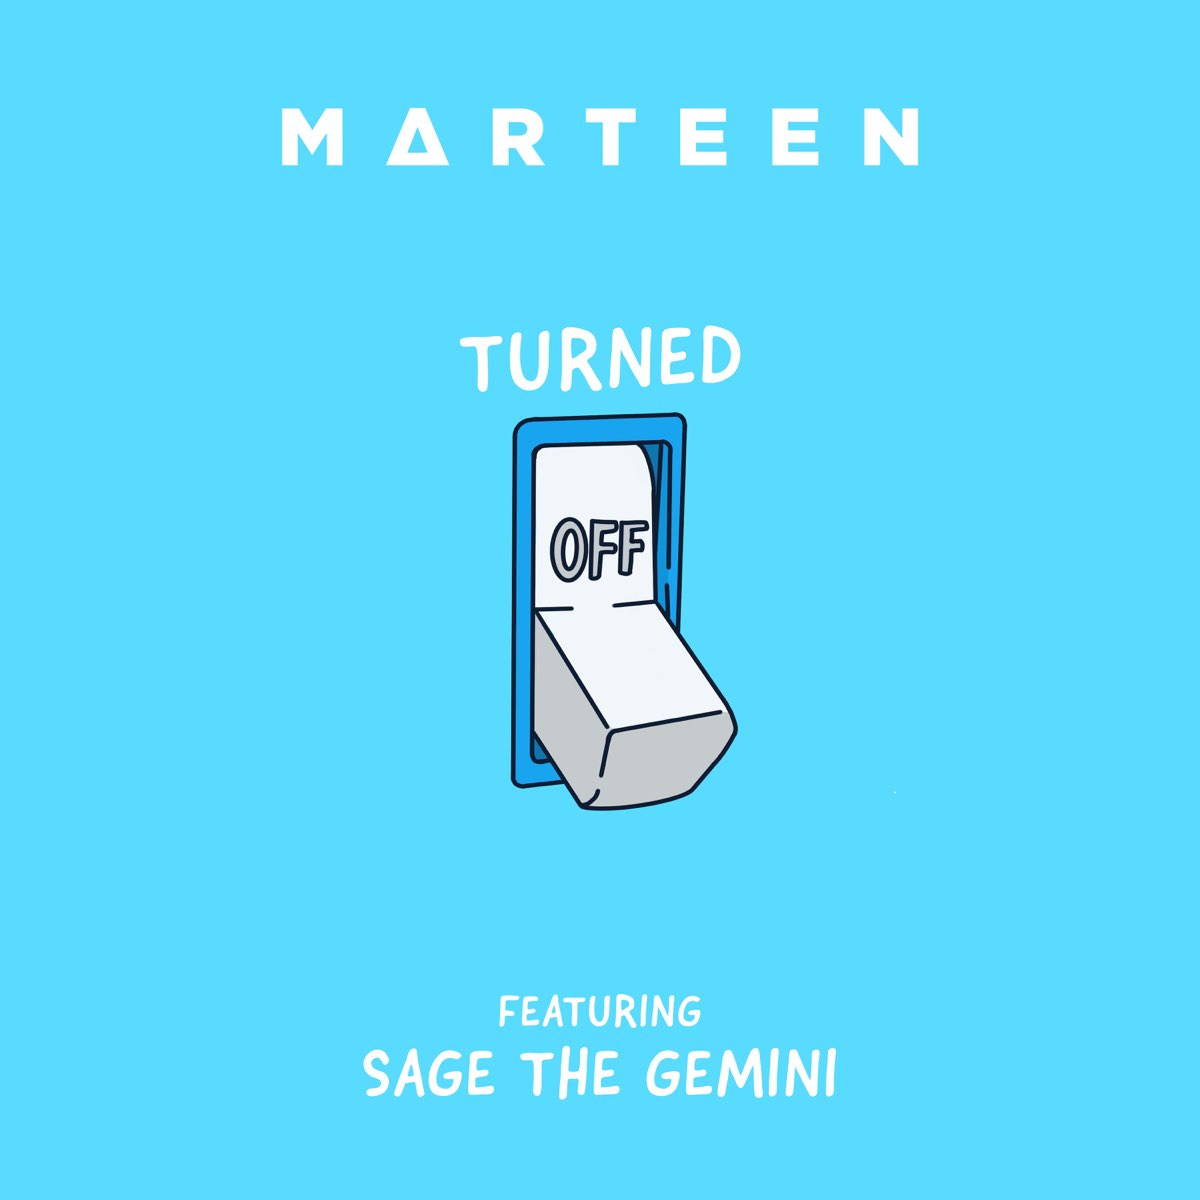 Sage the Gemini. Turn off the emotions обои. Turn it off. Gemini turn ons. Can you turn the music